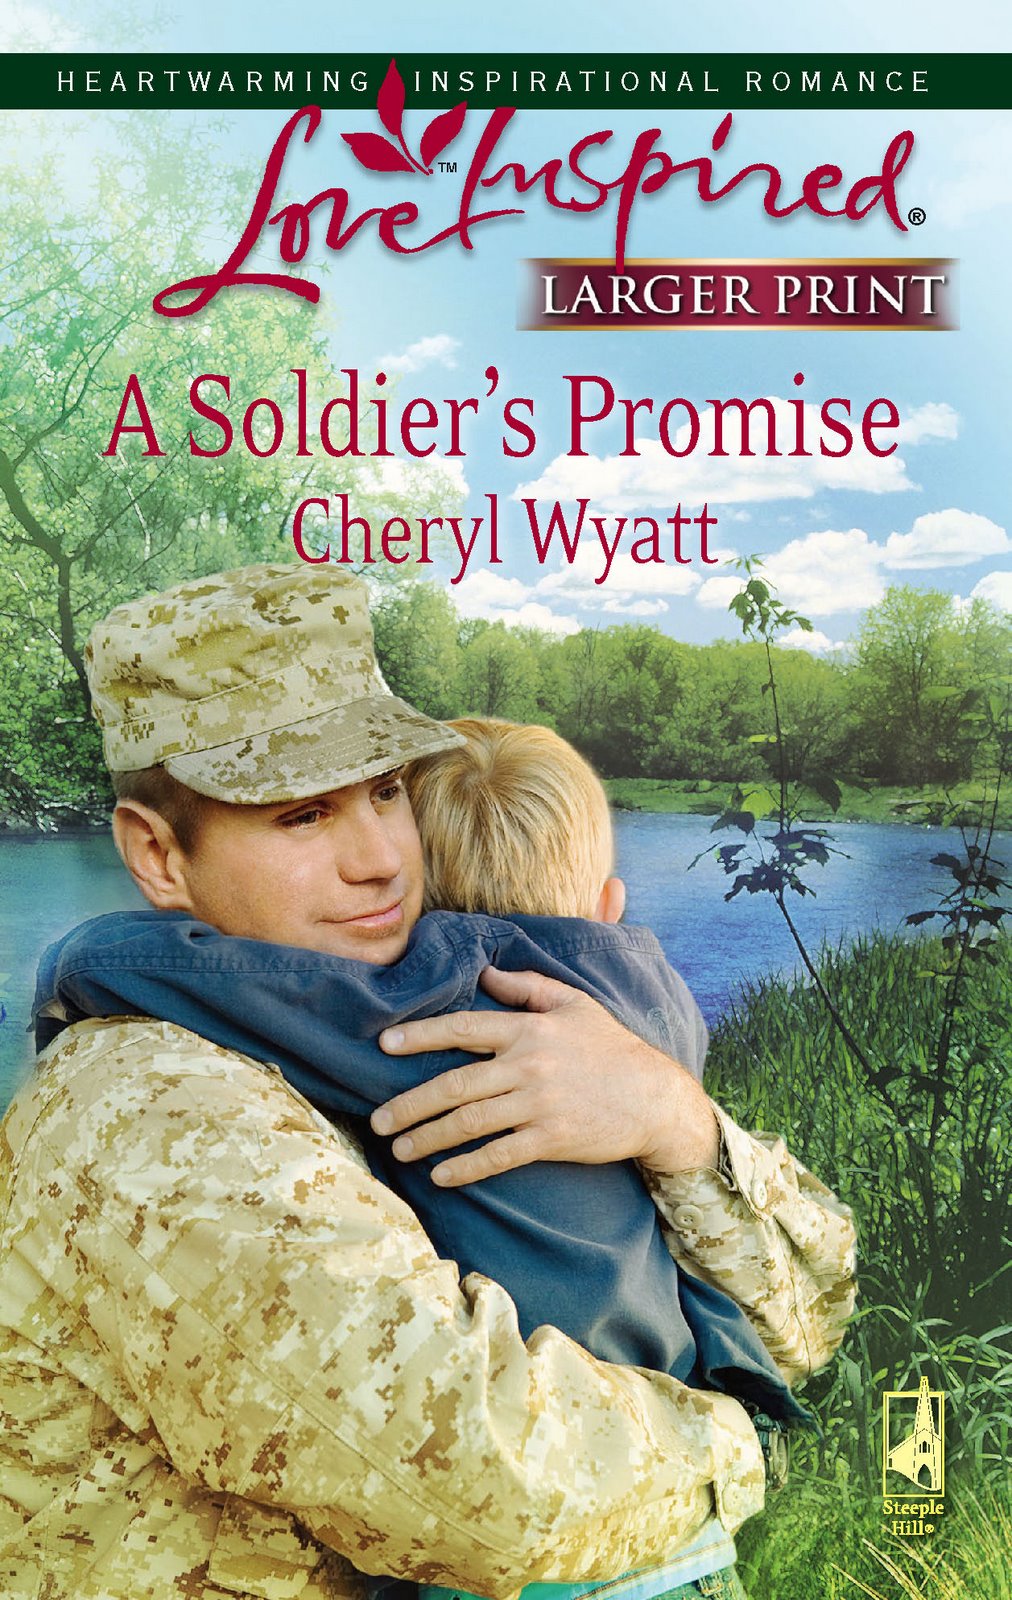 [COVER_ART_A+Soldier's+Promise.jpg]